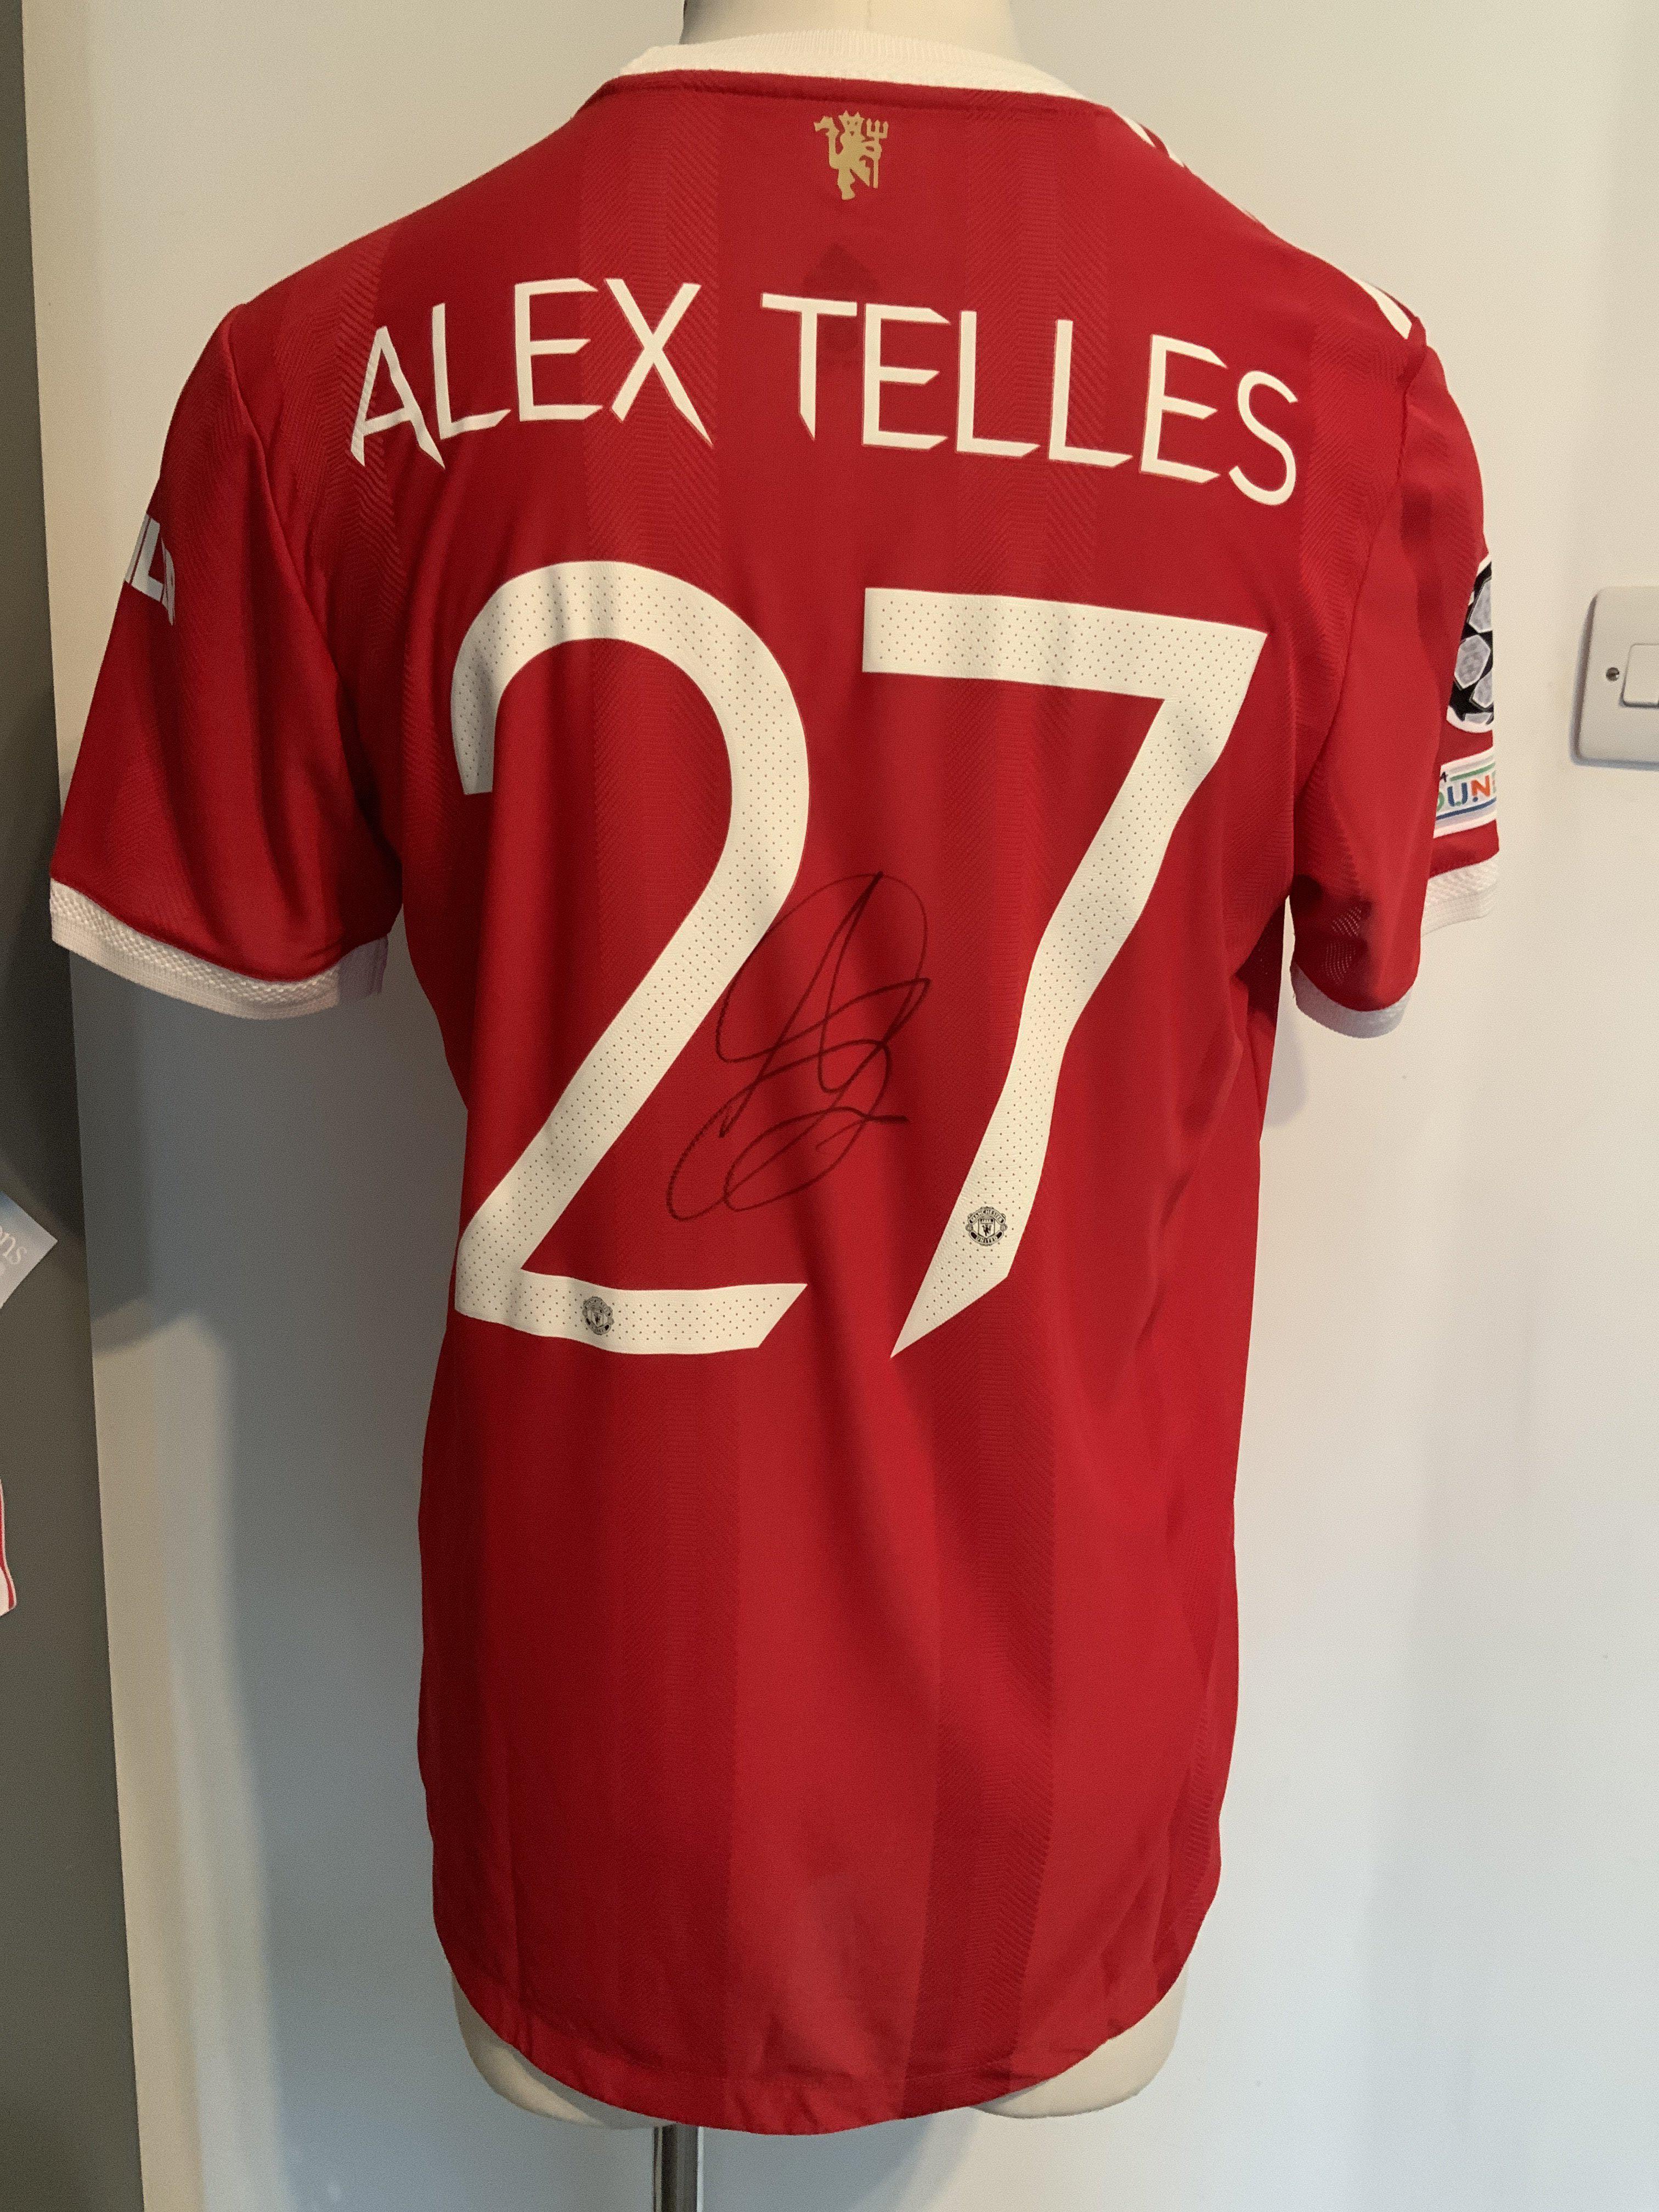 Telles 2021 - 2022 Manchester United Match Issued